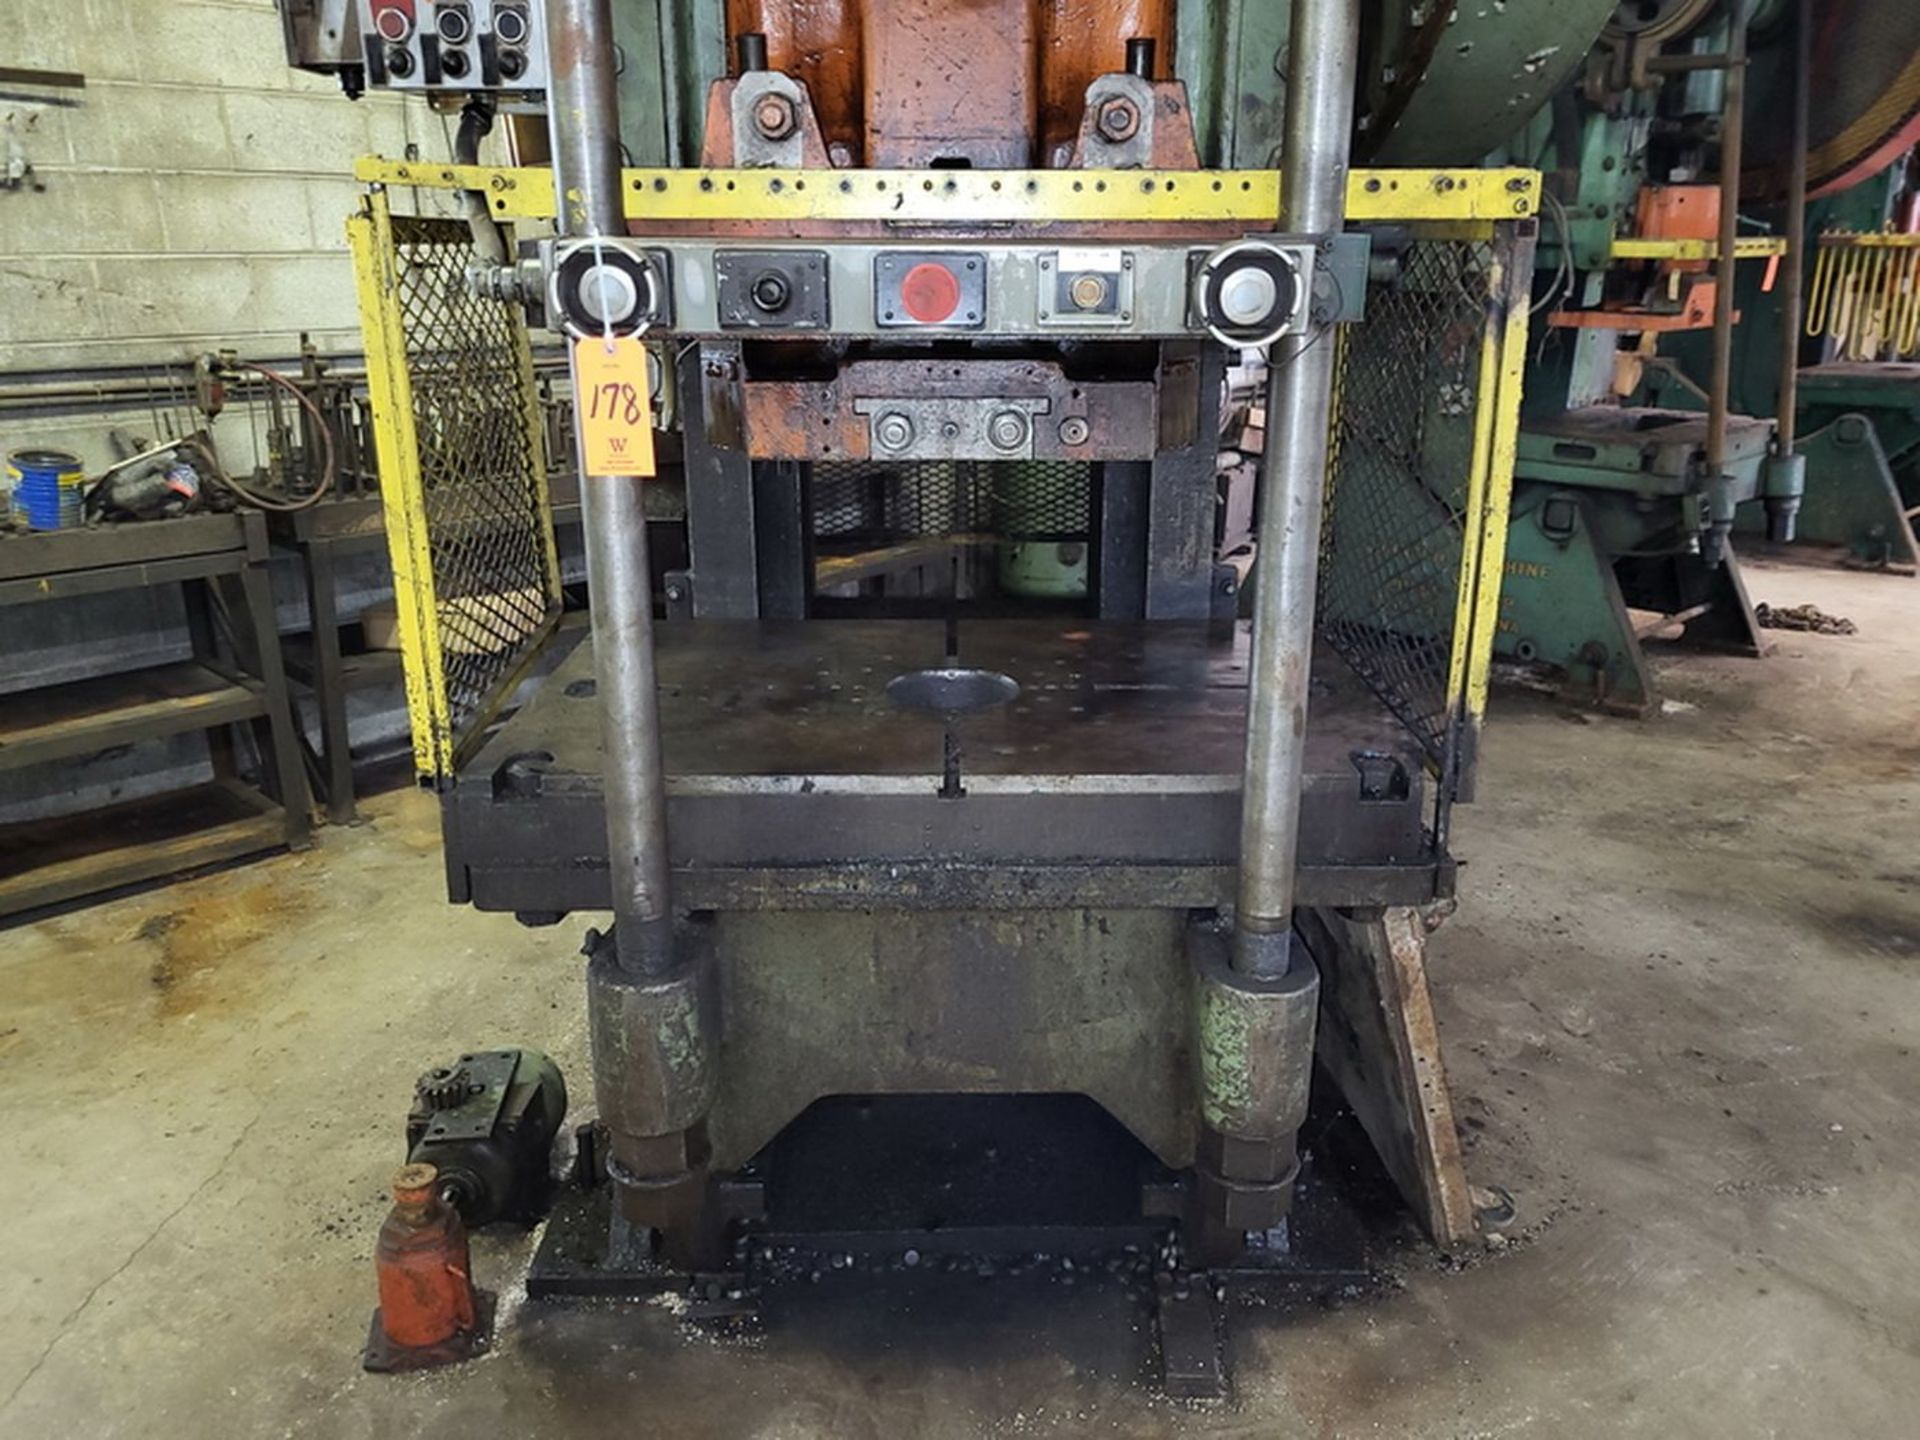 Warco 150-Ton Cap. Model 150 O.B.I. Punch Press, SN: 84119, Guarded, Air Clutch, Auto Adjust Motor - Image 4 of 5